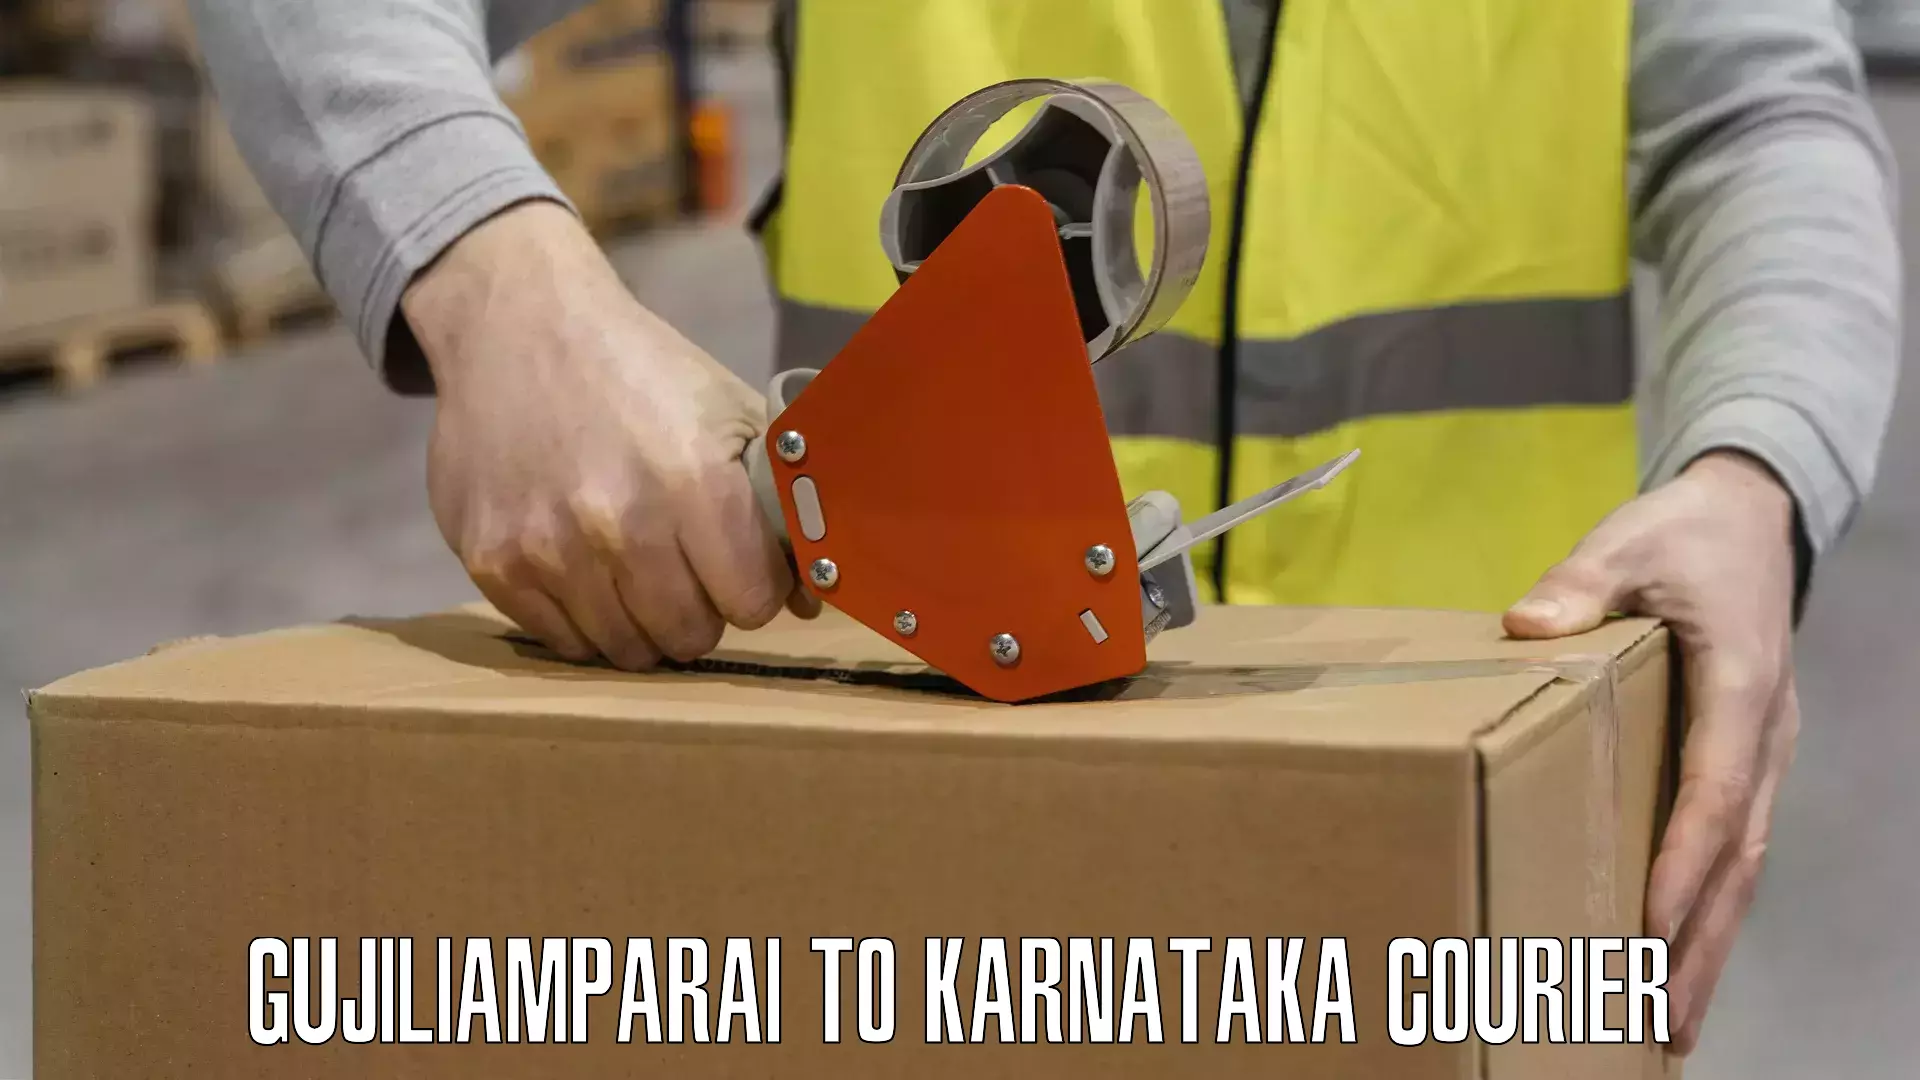 Easy access courier services Gujiliamparai to Dharmasthala